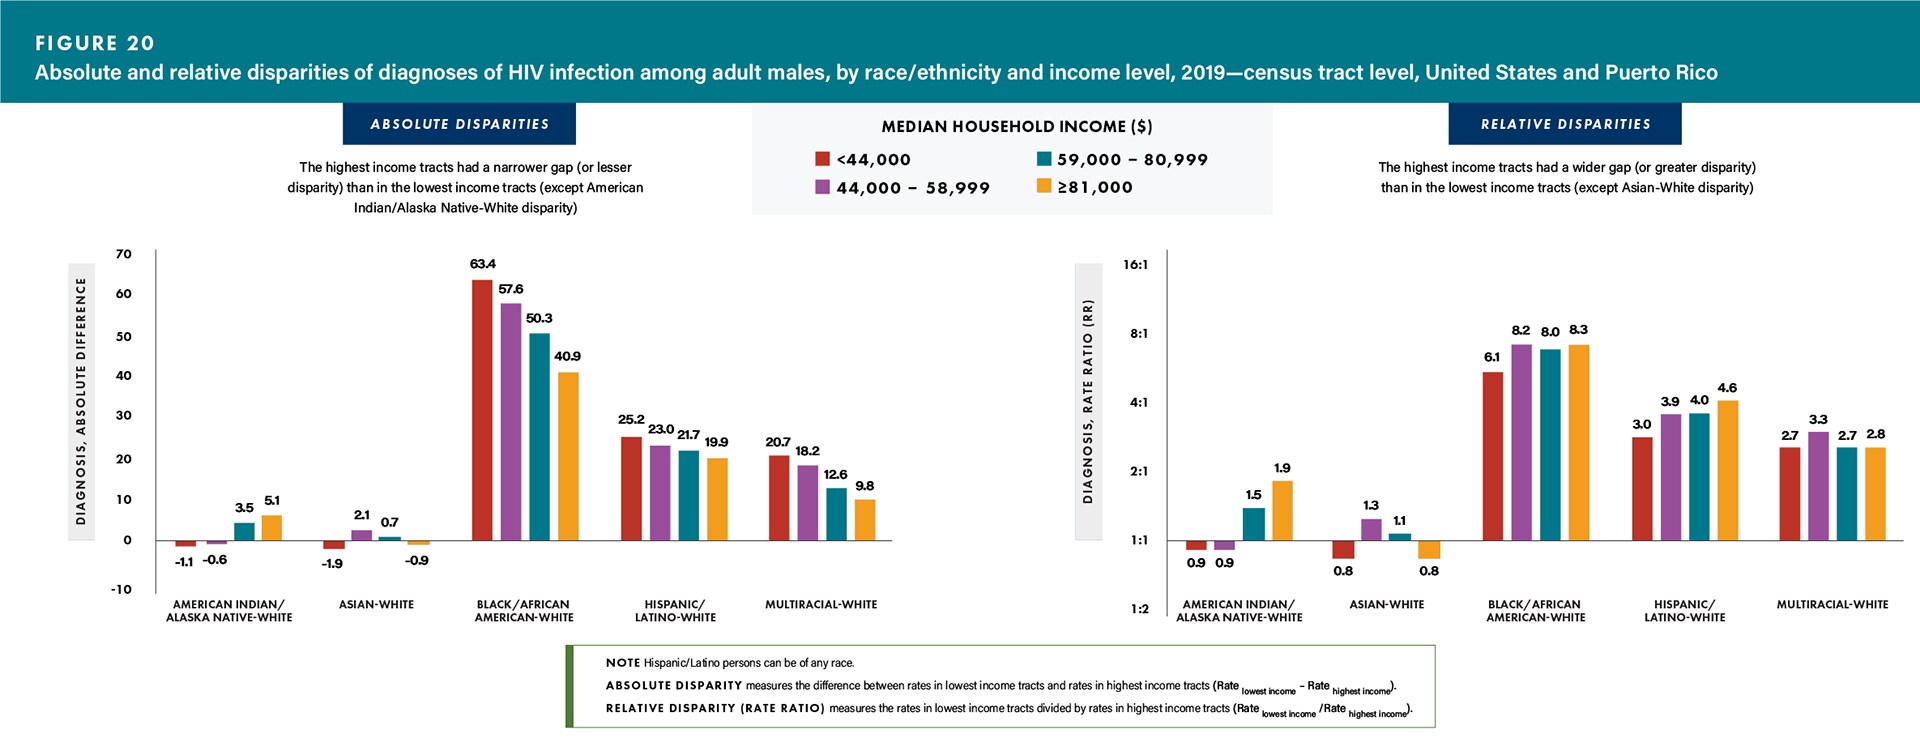 For absolute disparities, the highest income tracts had a narrower gap (or lesser disparity) than in the lowest income tracts (except American Indian/Alaskan Native-White disparity). For relative disparities, the highest income tracts had a wider gap (or greater disparity) than in the lowest income tracts (except Asian-White disparity).